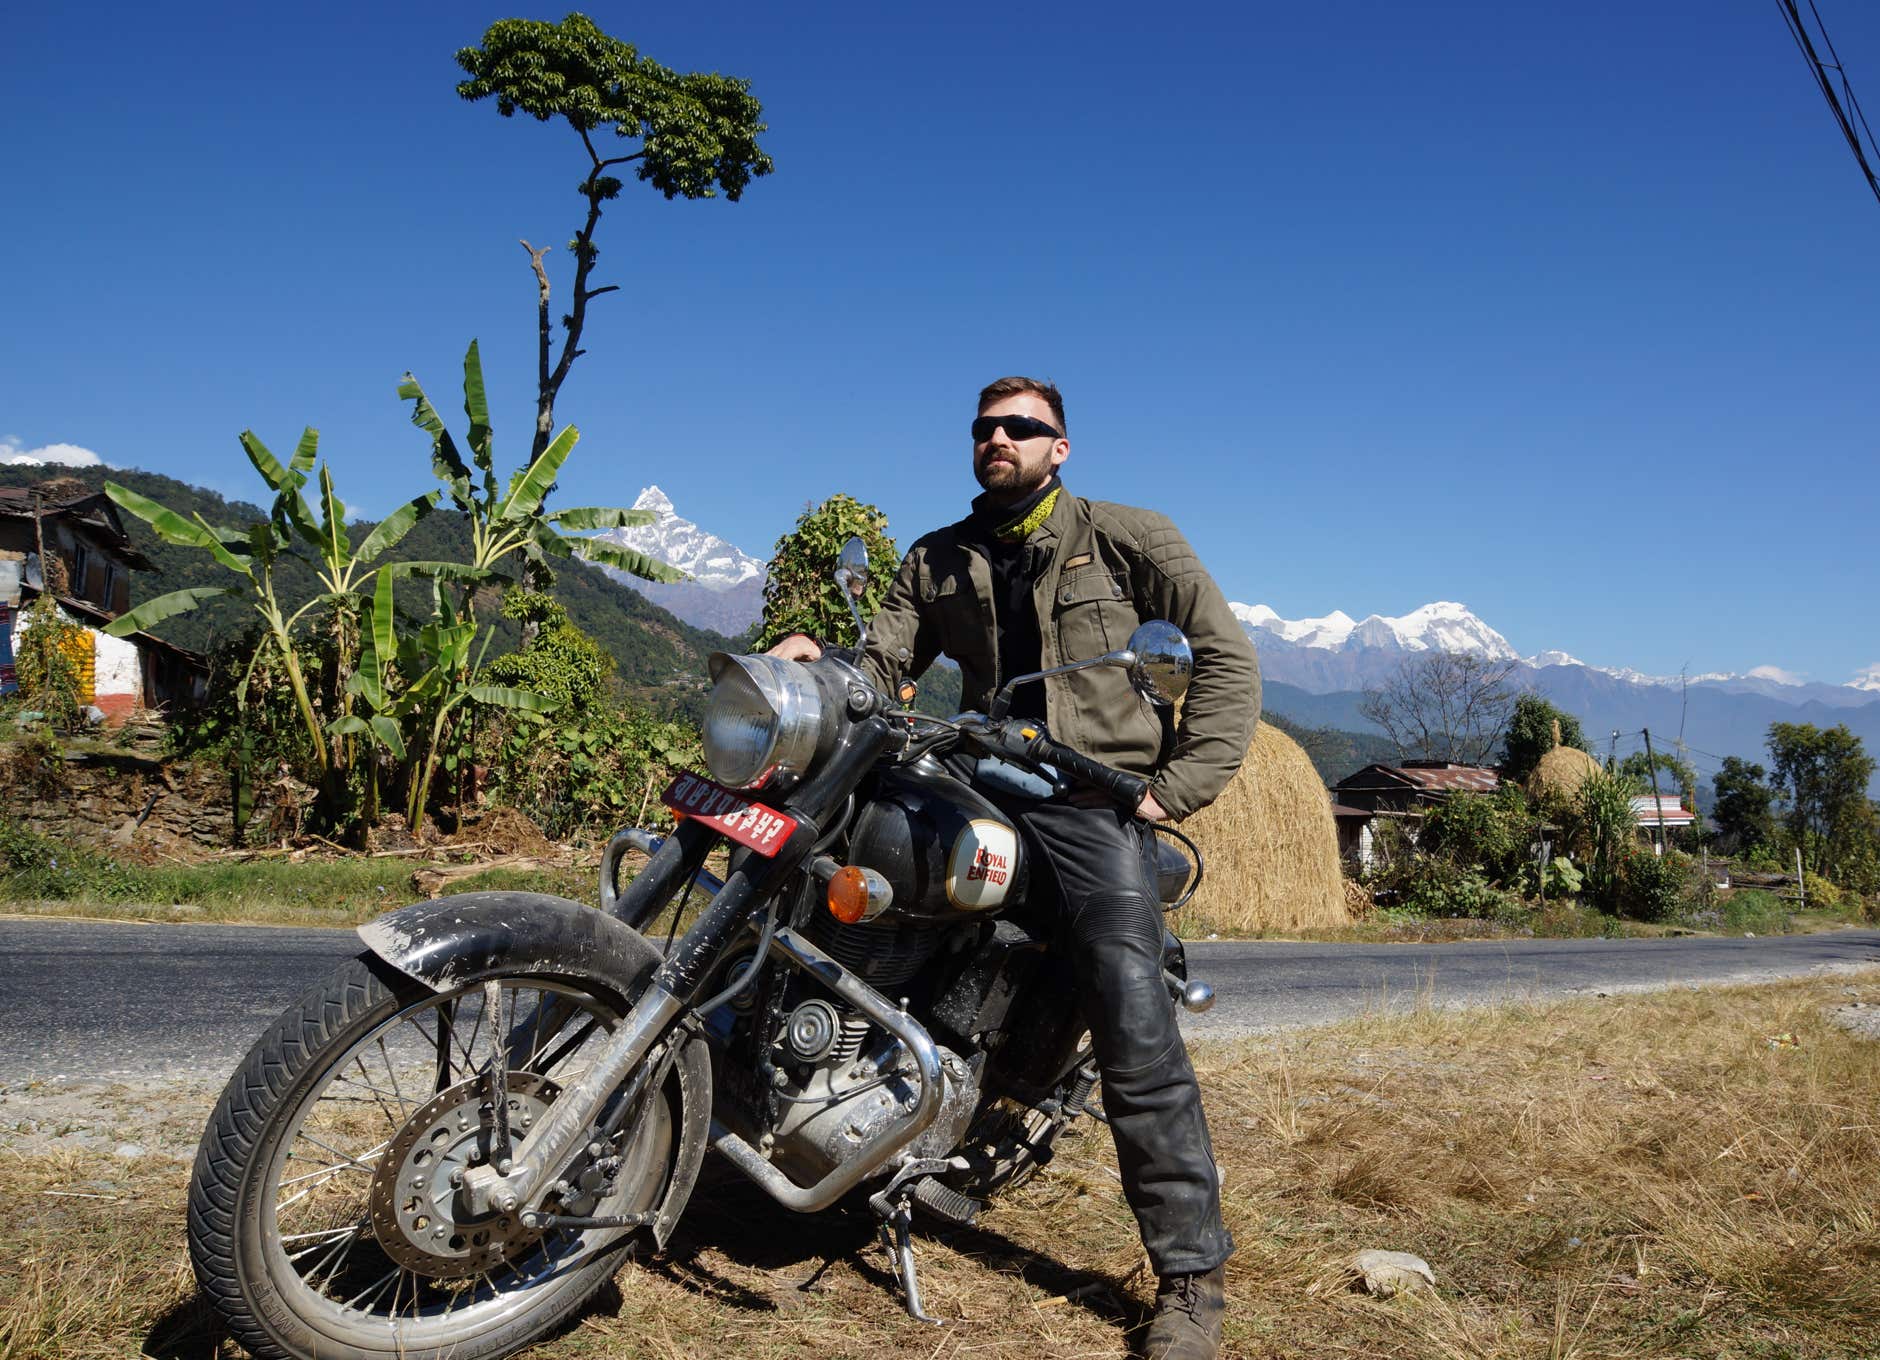 Nepal & Europe Motorbike Tours by www.easy-rider-tours.com